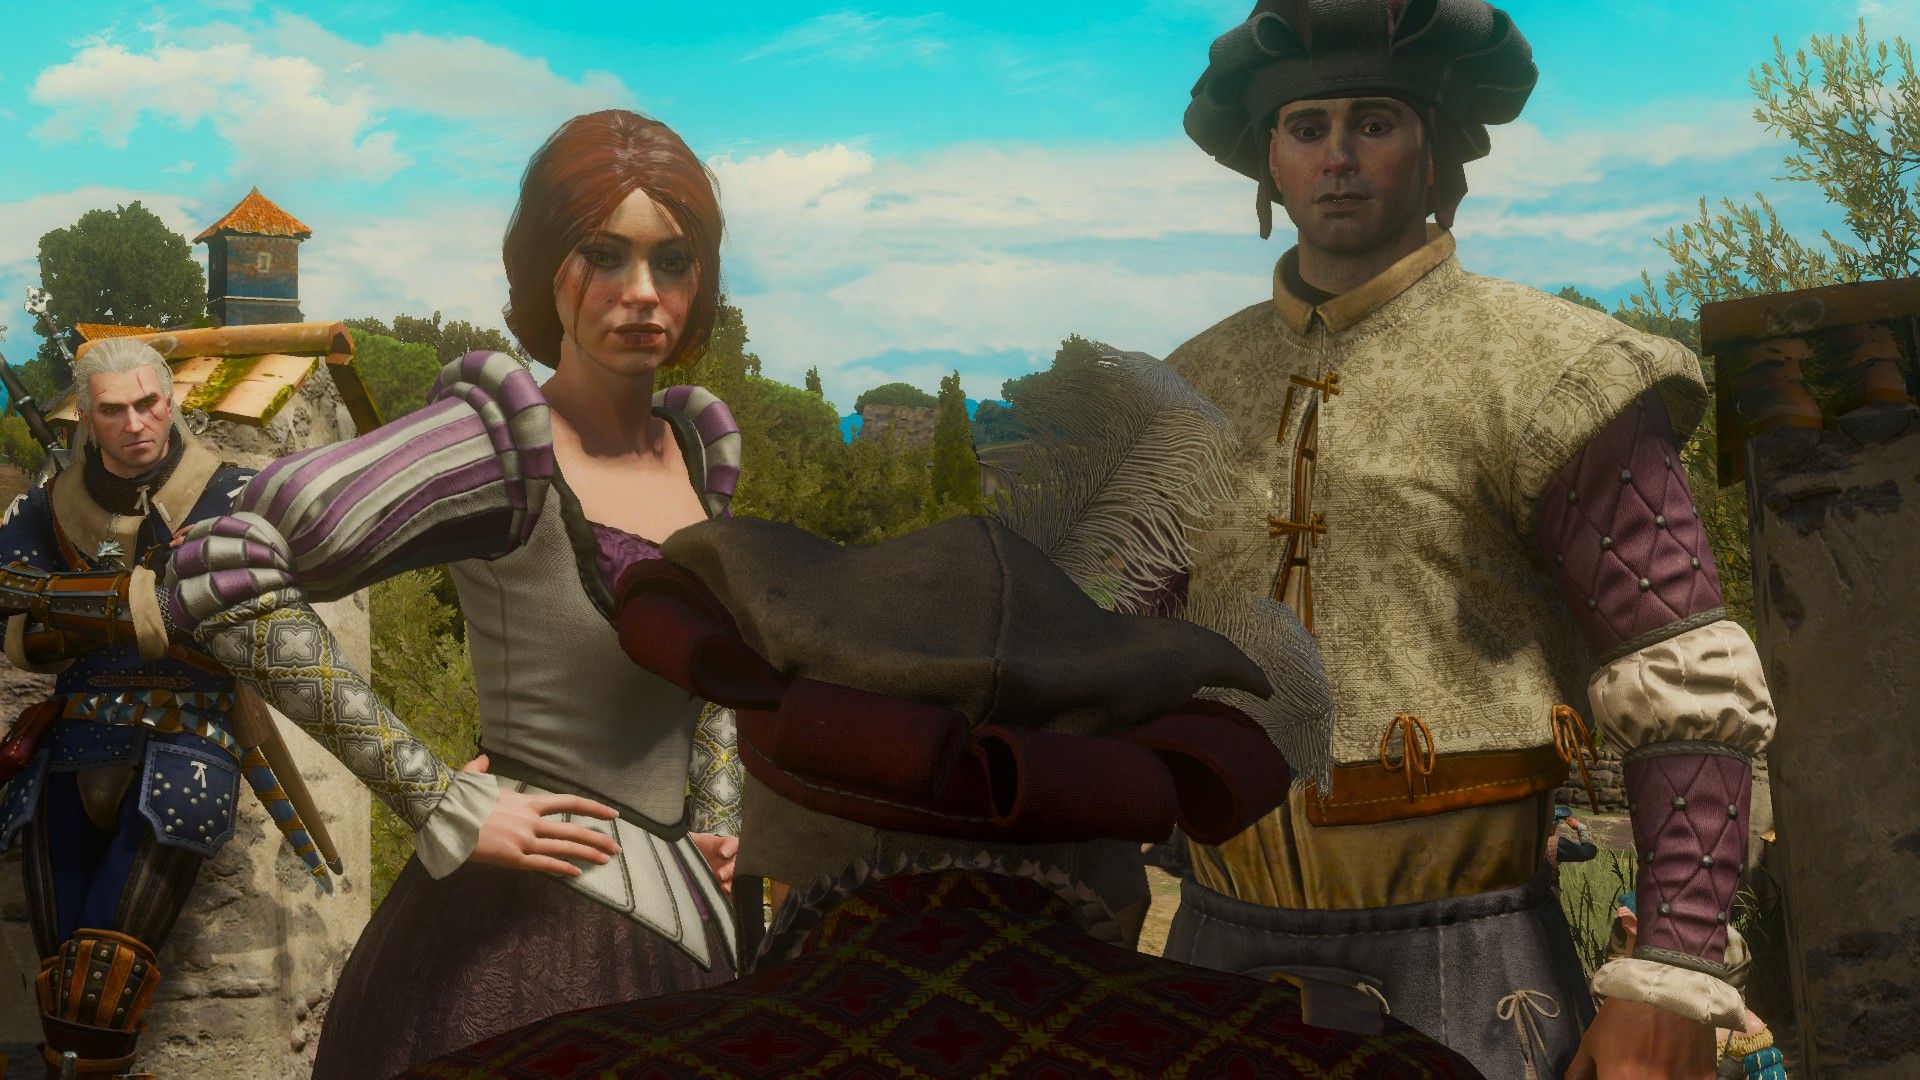 The Witcher 3 A Complete Guide To Blood and Wines Wine Wars Questline